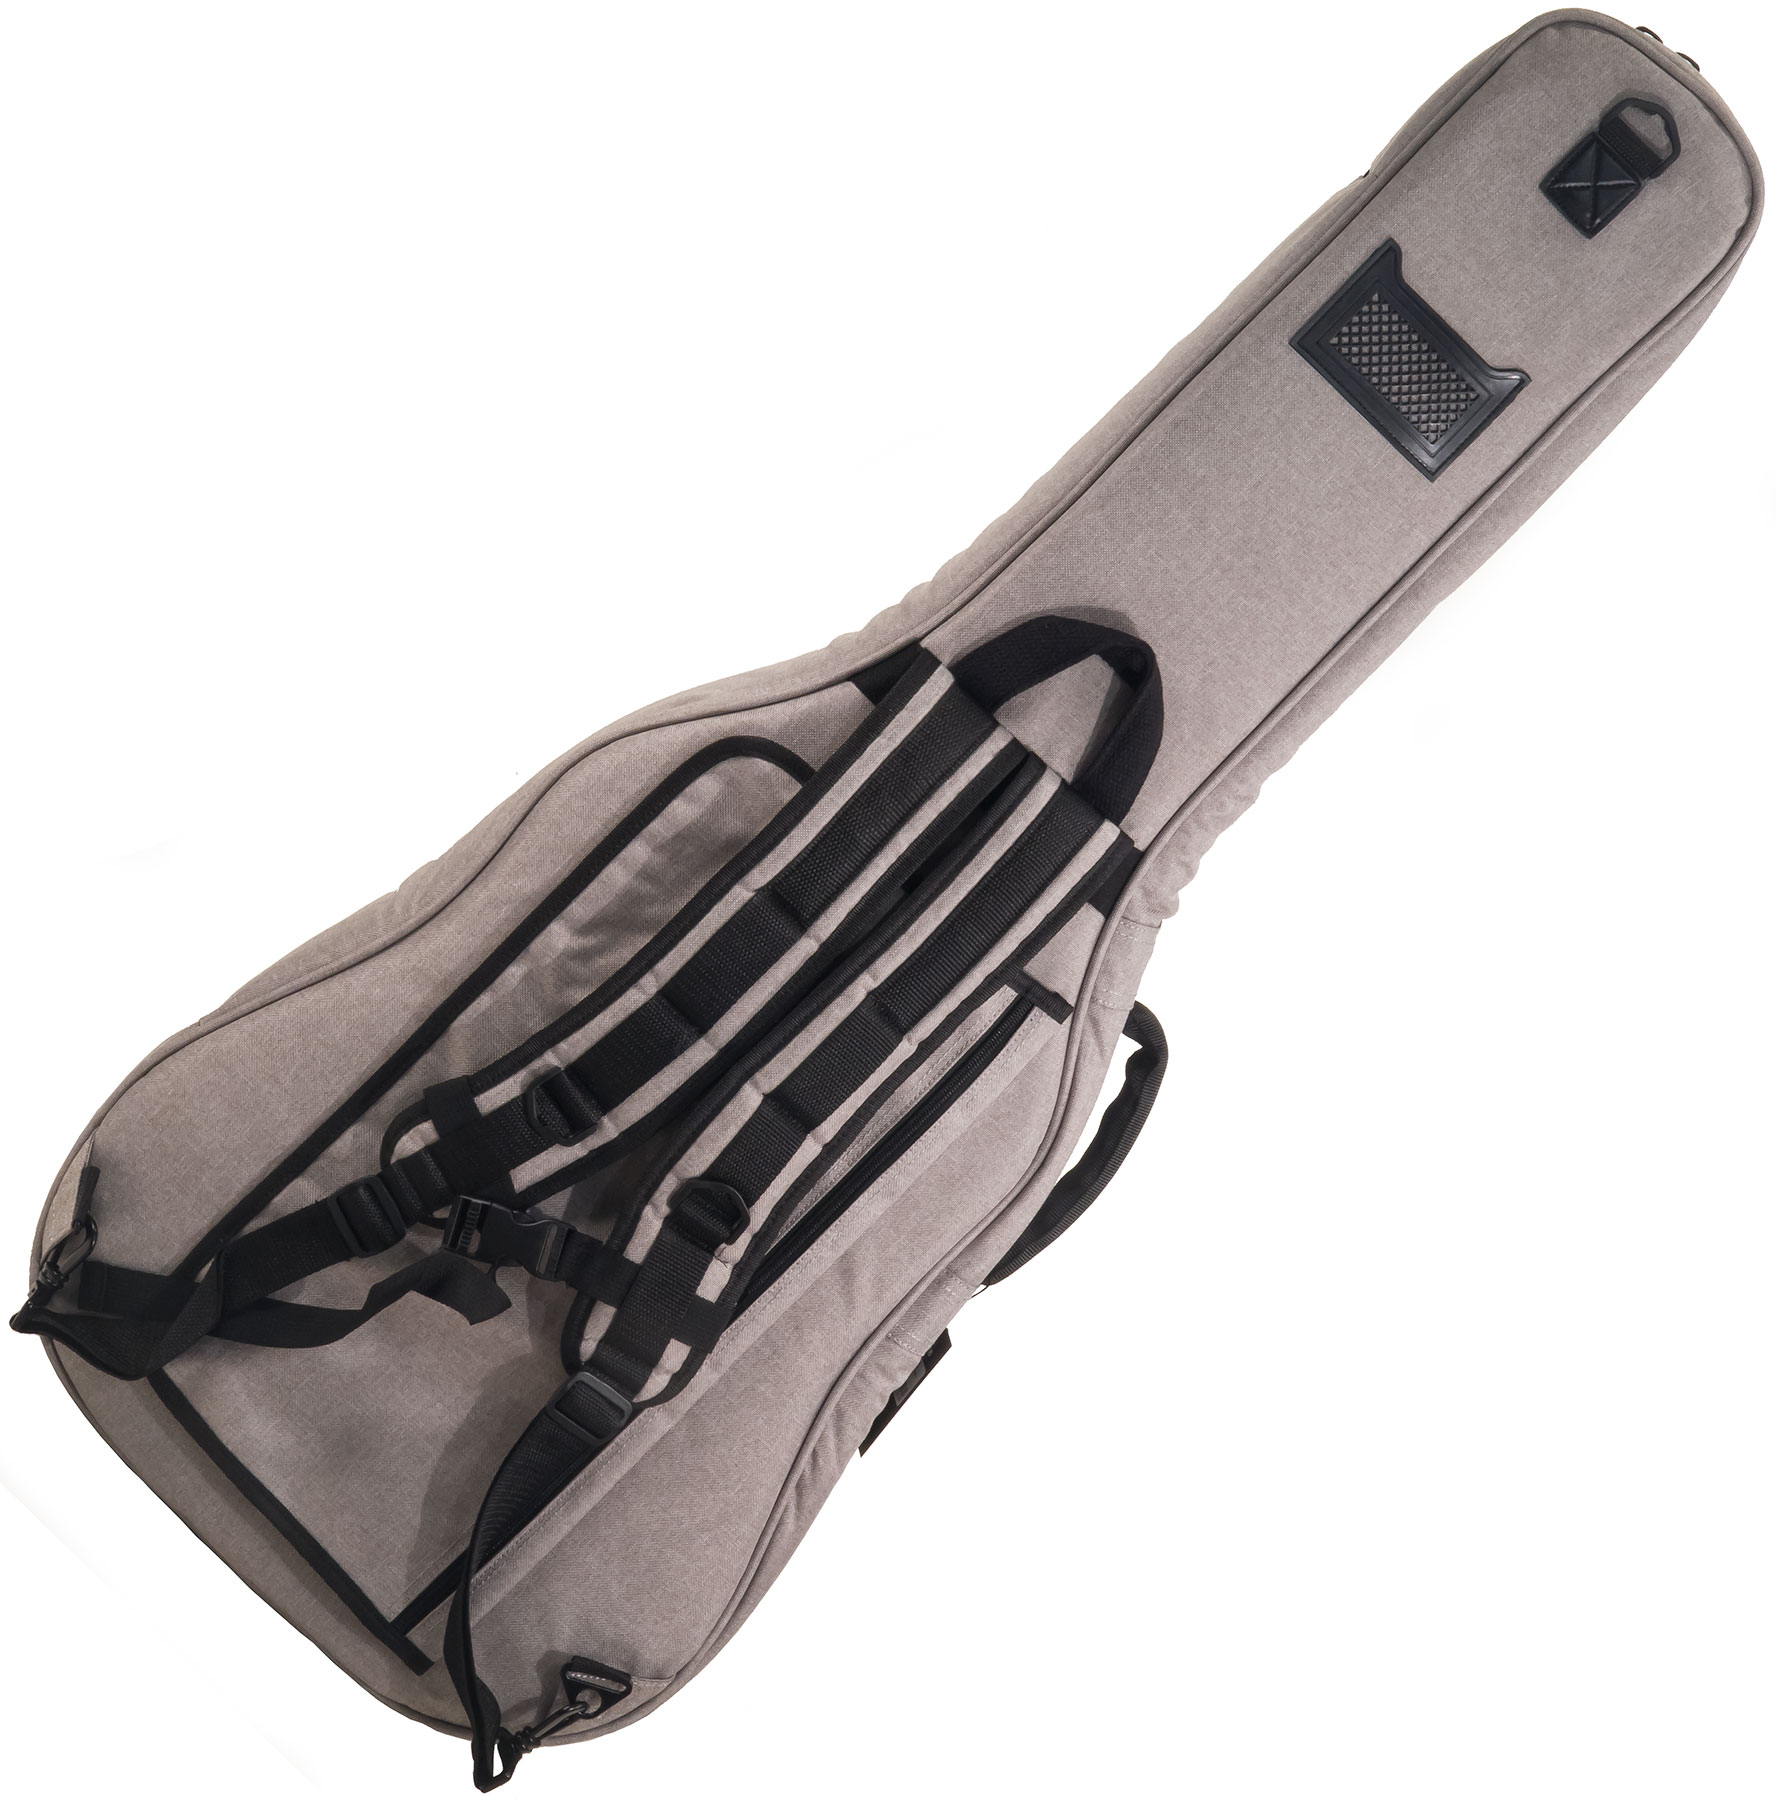 X-tone 2030 Cla44-gy Deluxe Nylon Classical 4/4 Guitar Grey (2073) - Classic guitar gig bag - Variation 1